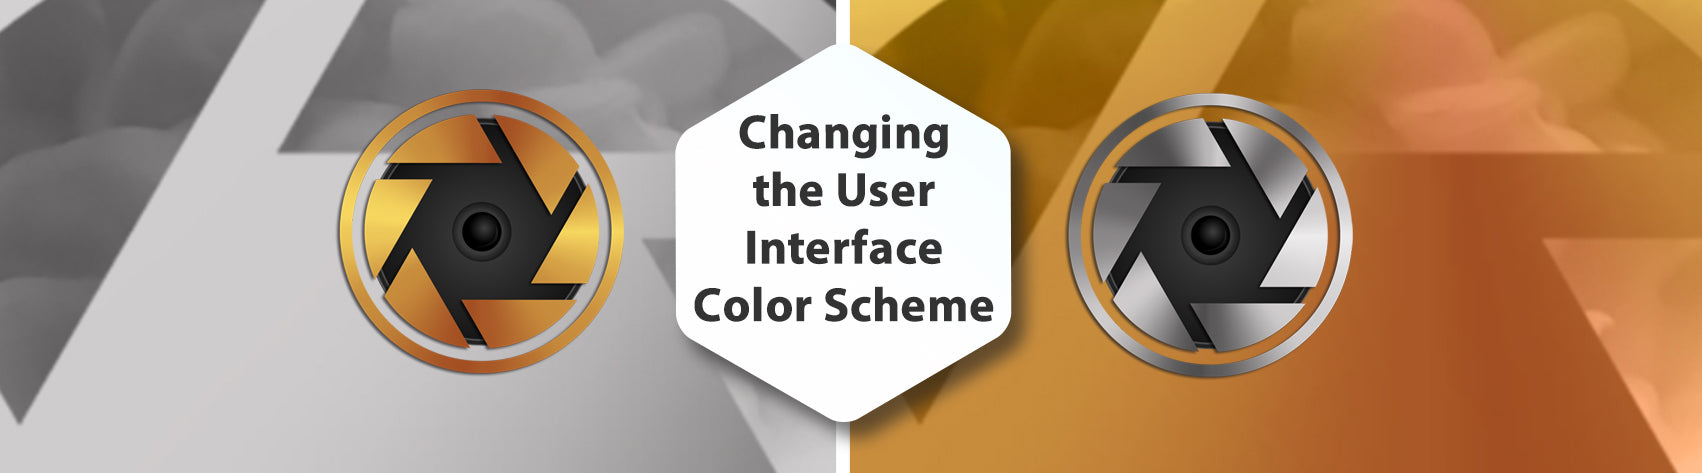 Changing the User Interface Color Scheme